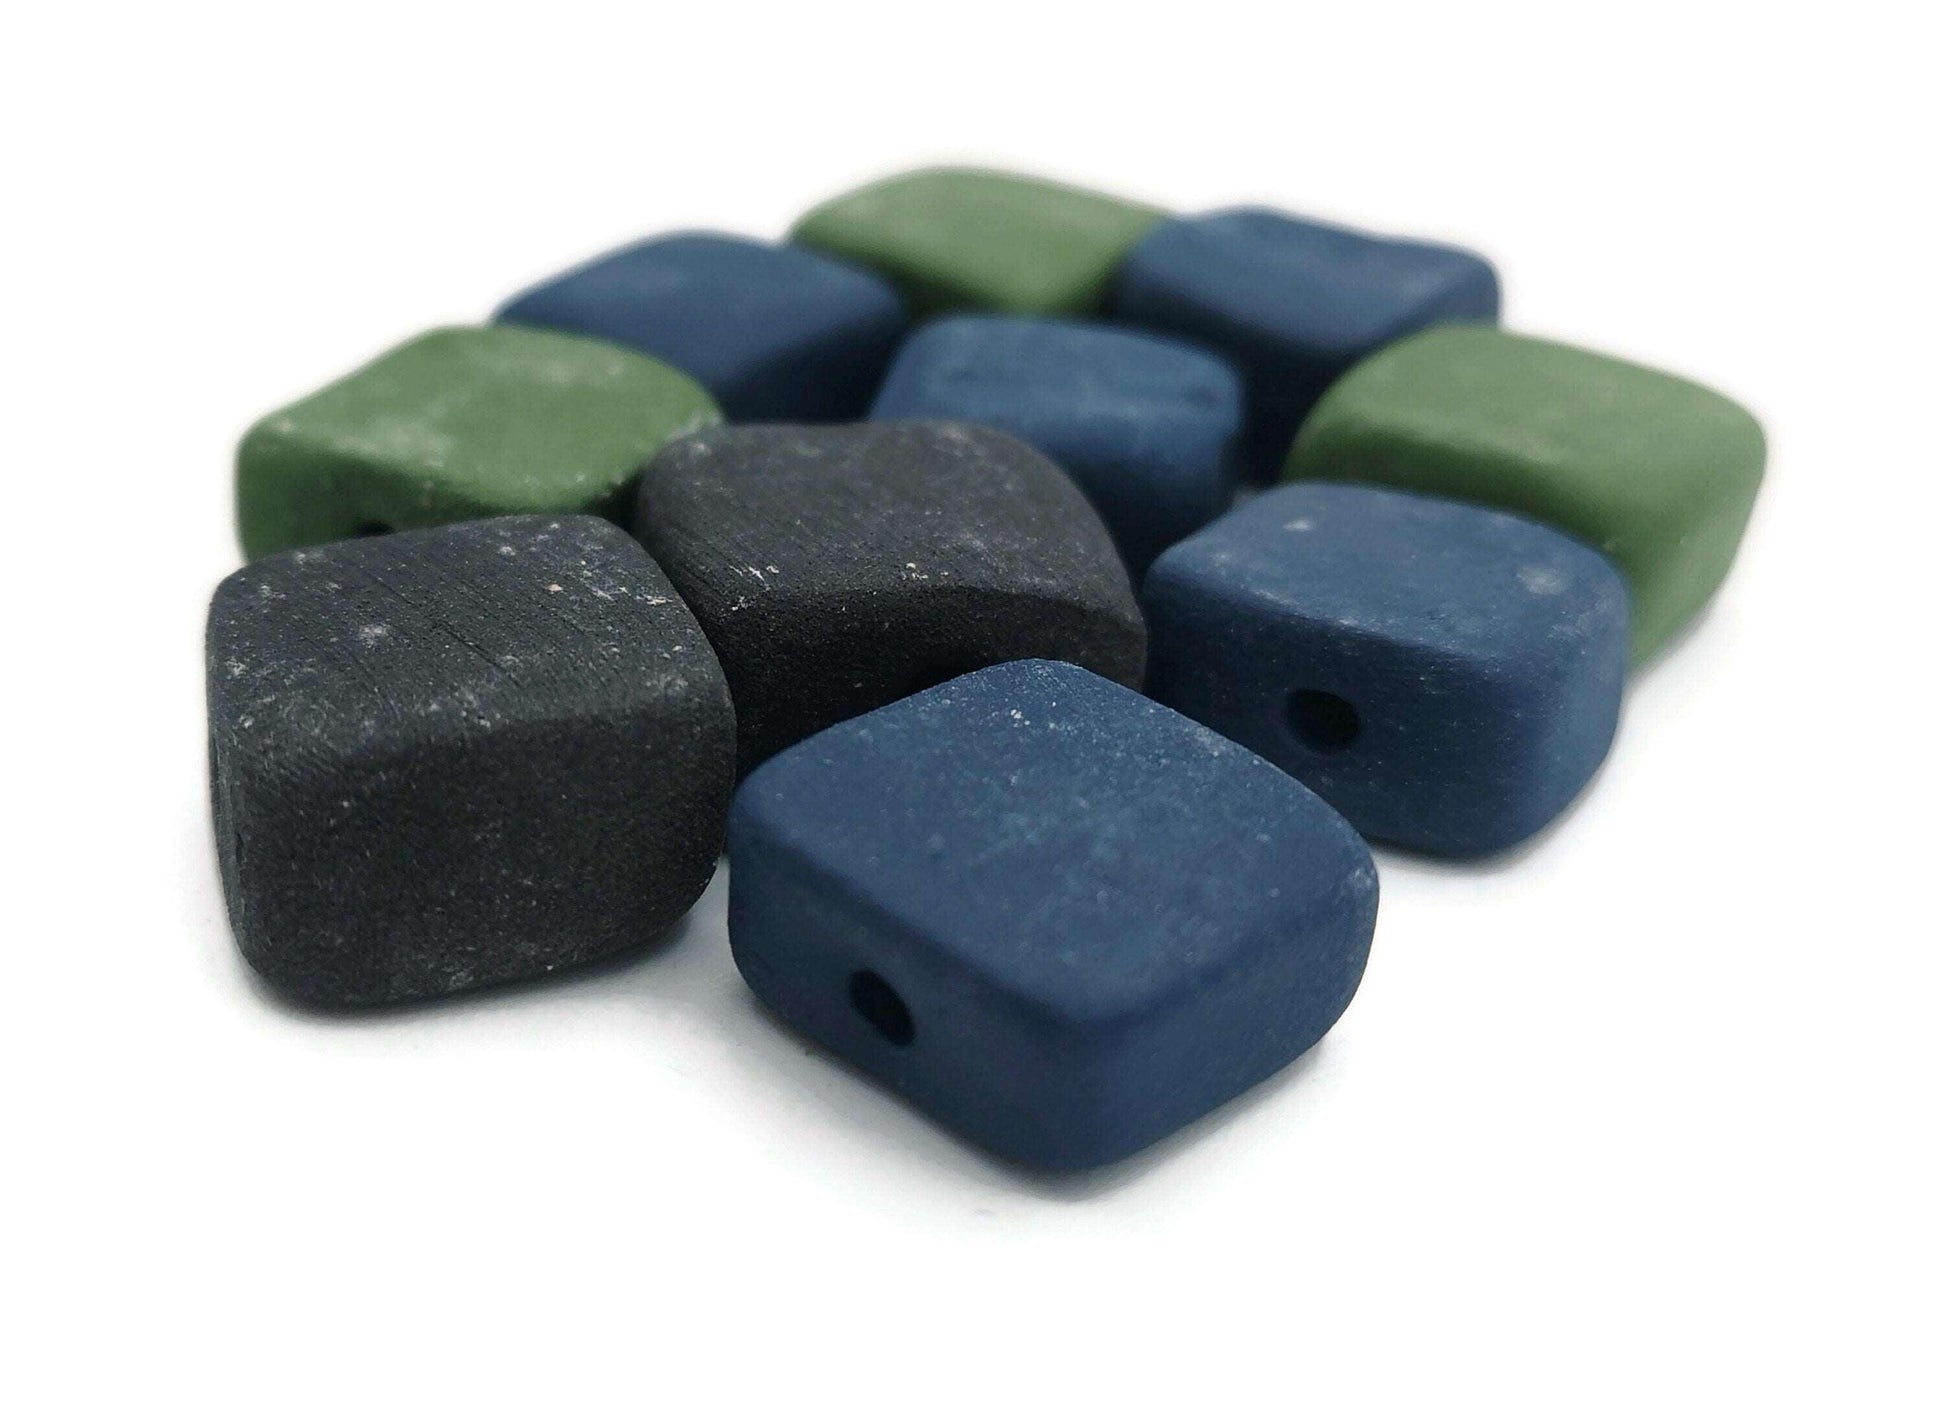 10Pc 15mm Ceramic Beads For jewelry Making 2mm Hole, Matte Square Clay Beads, Unique Assorted Beads Set Square Shape, Large Handmade Beads